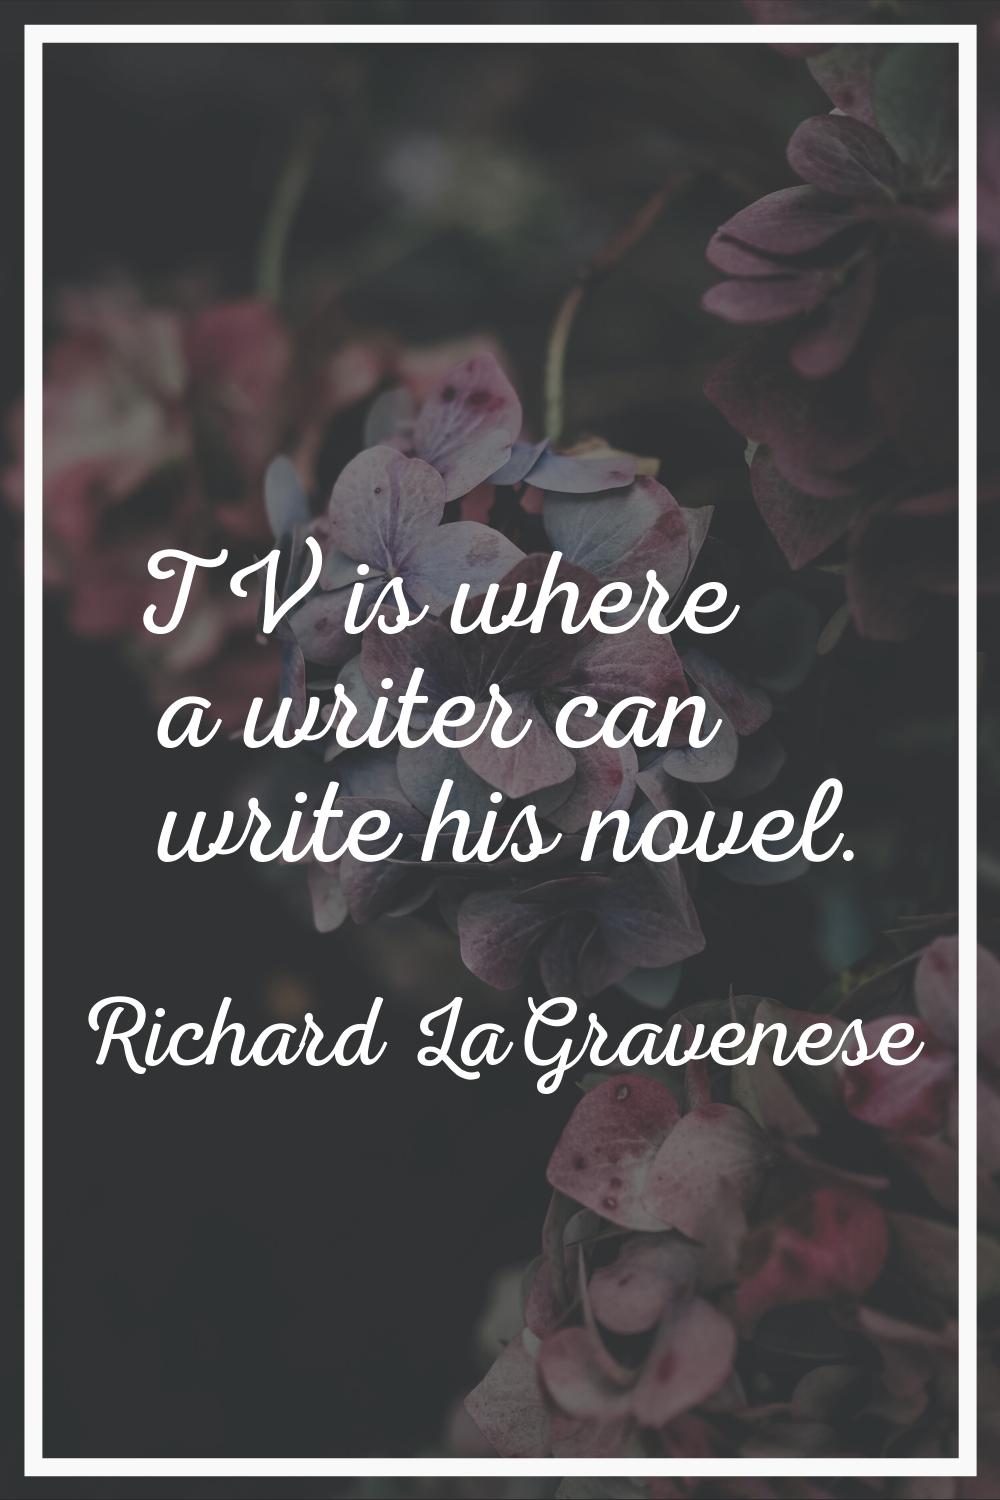 TV is where a writer can write his novel.